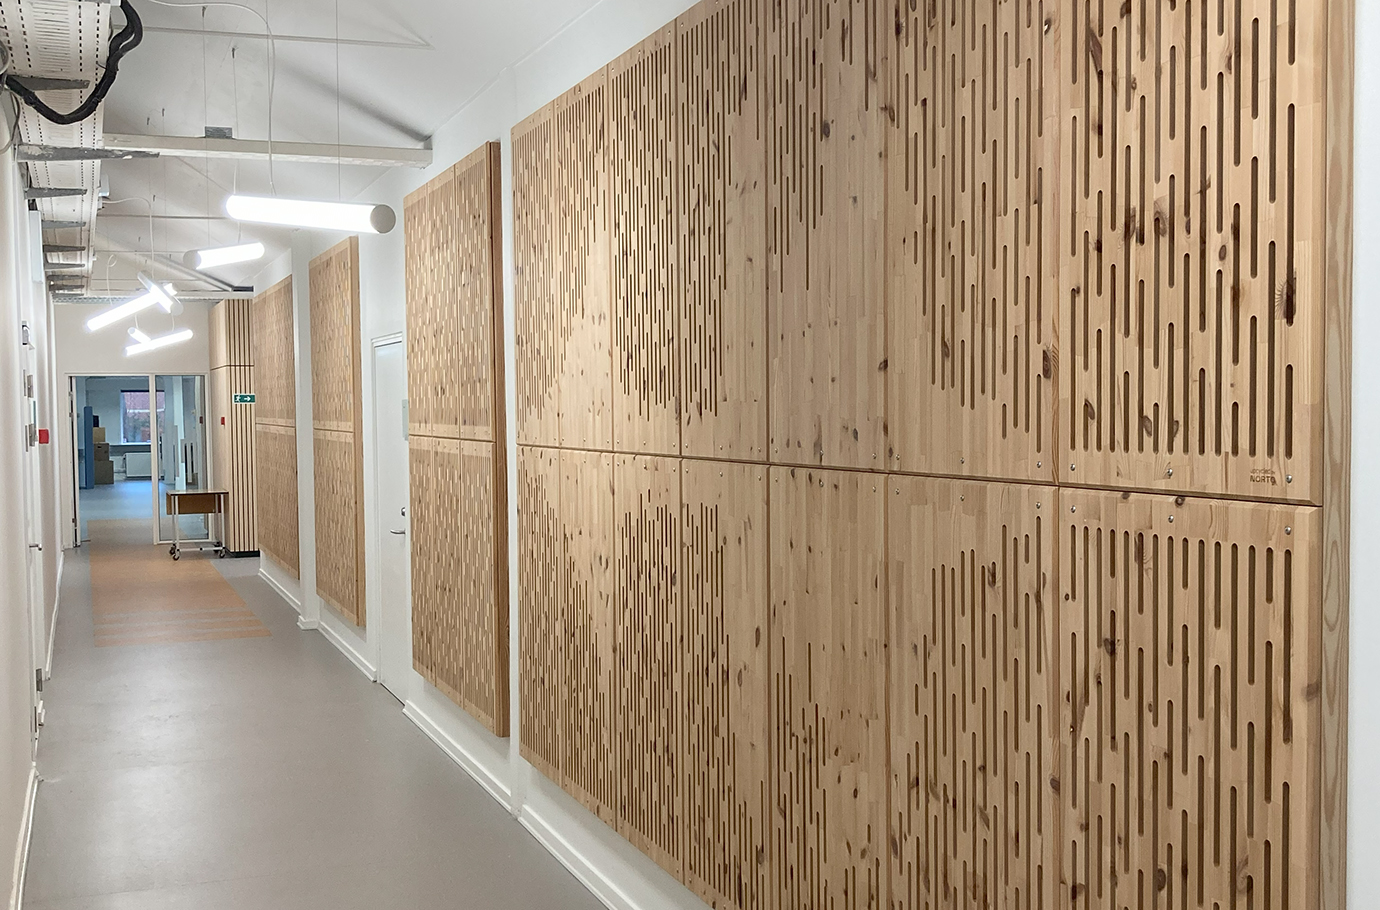 Norto wall absorber panels